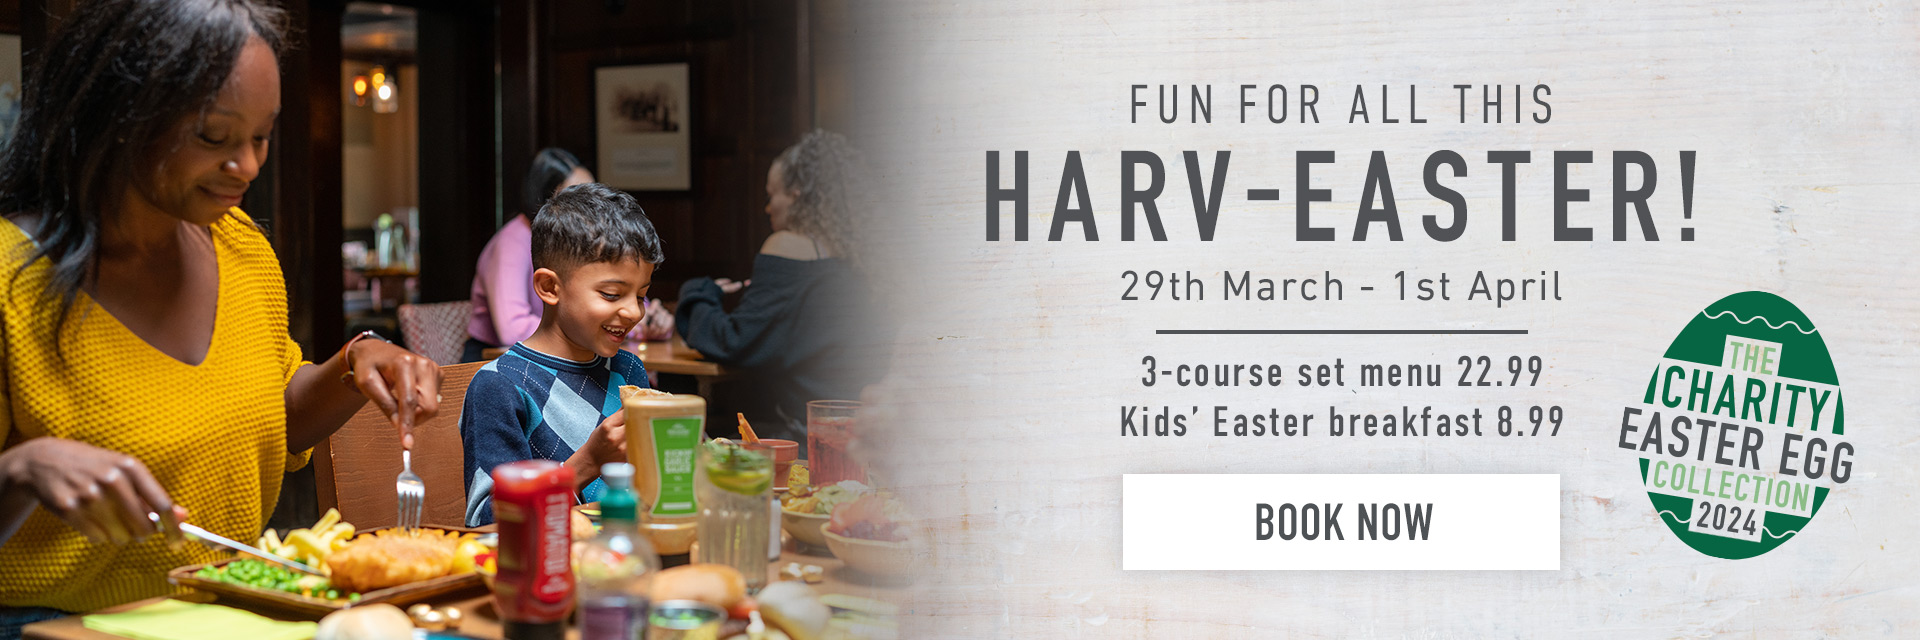 Easter at Harvester Ravenswood in Ipswich